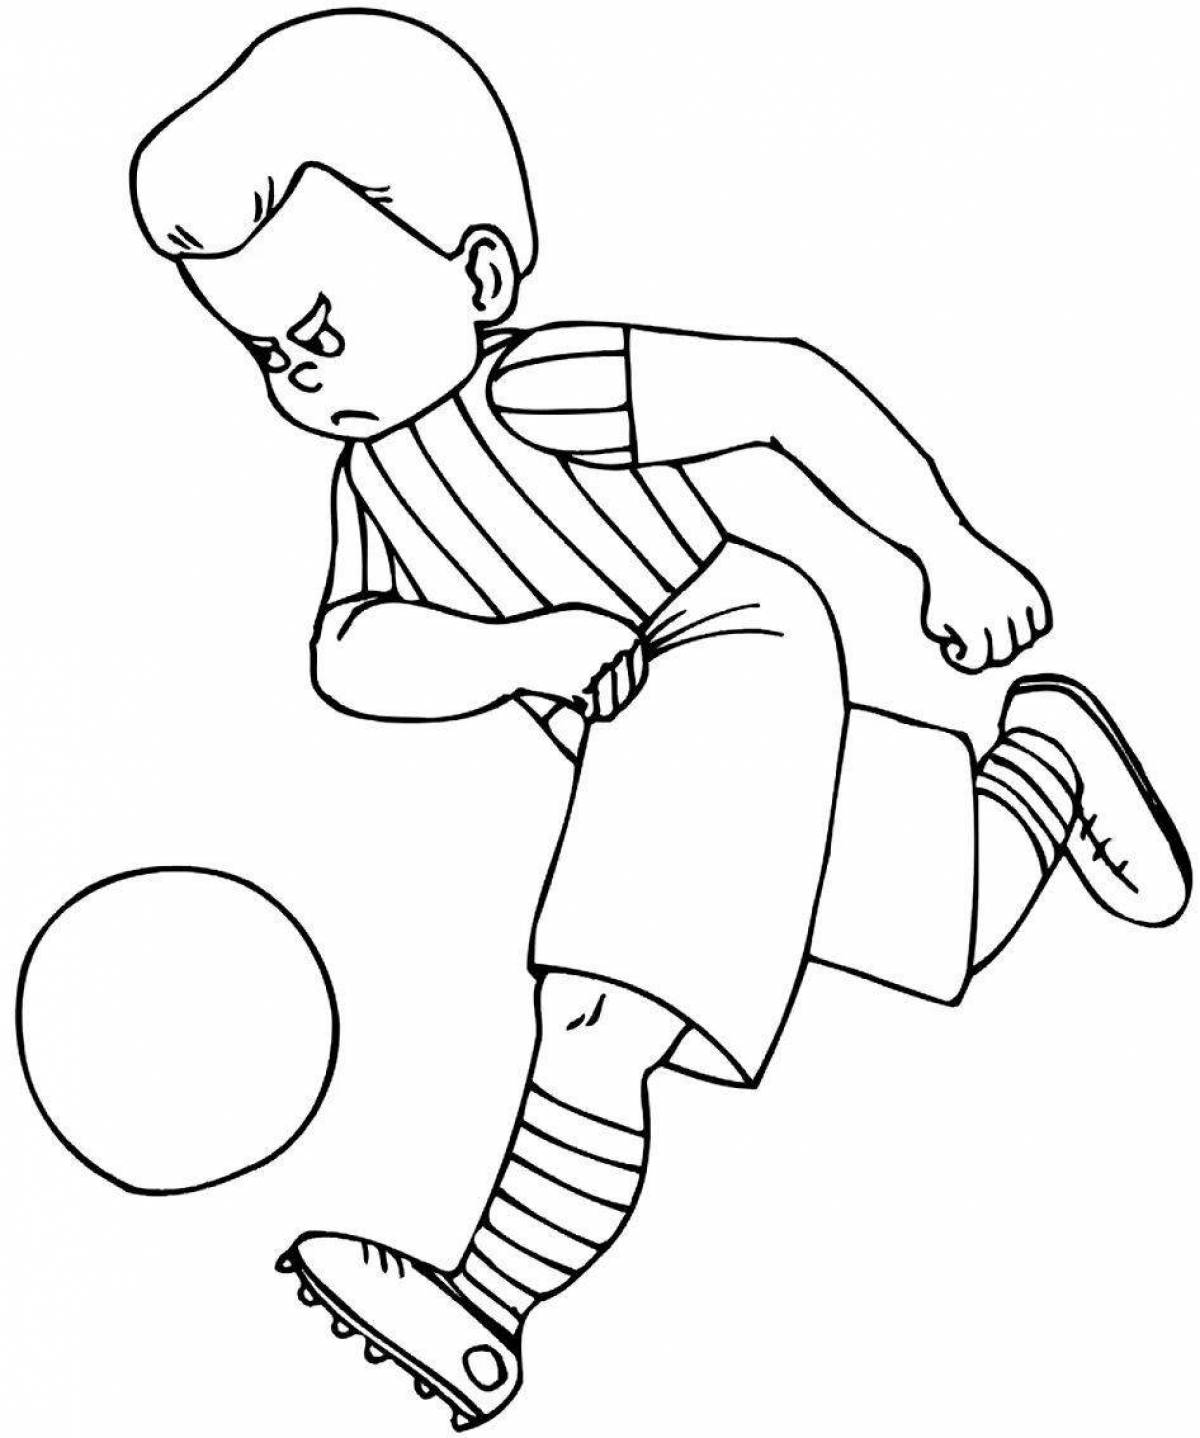 Coloring page playful running boy